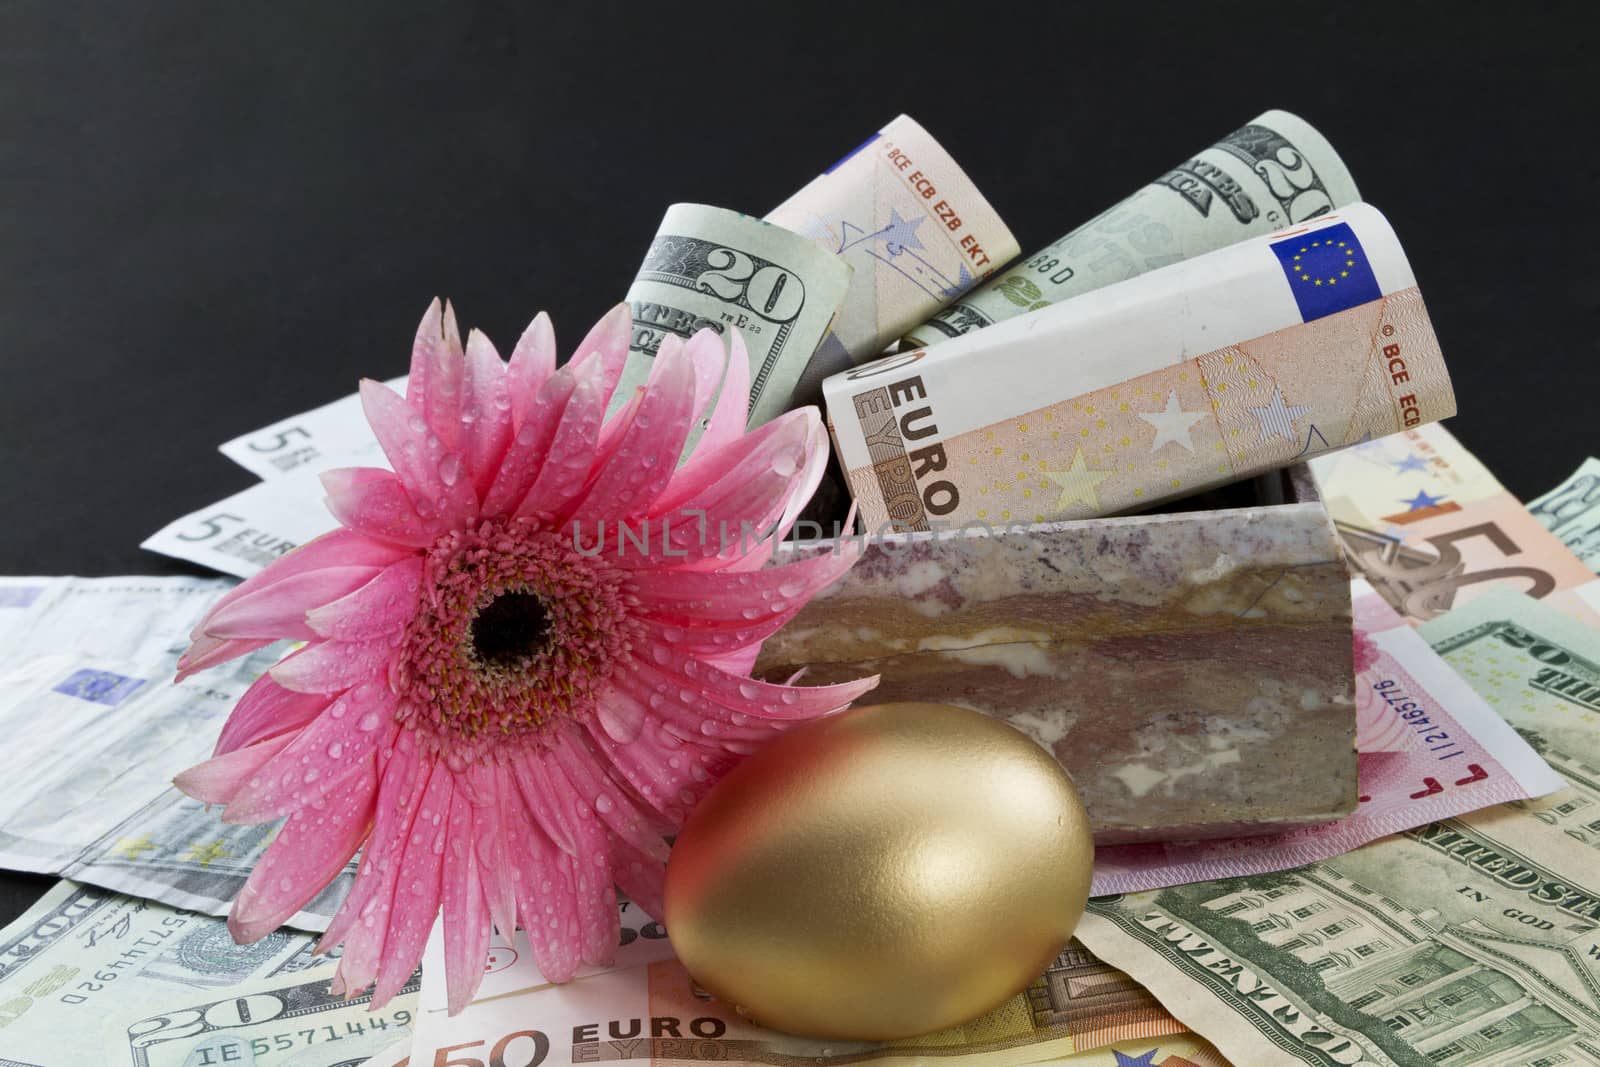 Pink daisy with fresh dew placed with gold egg on multiple, global currencies against black and in marble box reflect strong, worldwide financial success. Flower in pink suggests feminine involvement and leadership. 